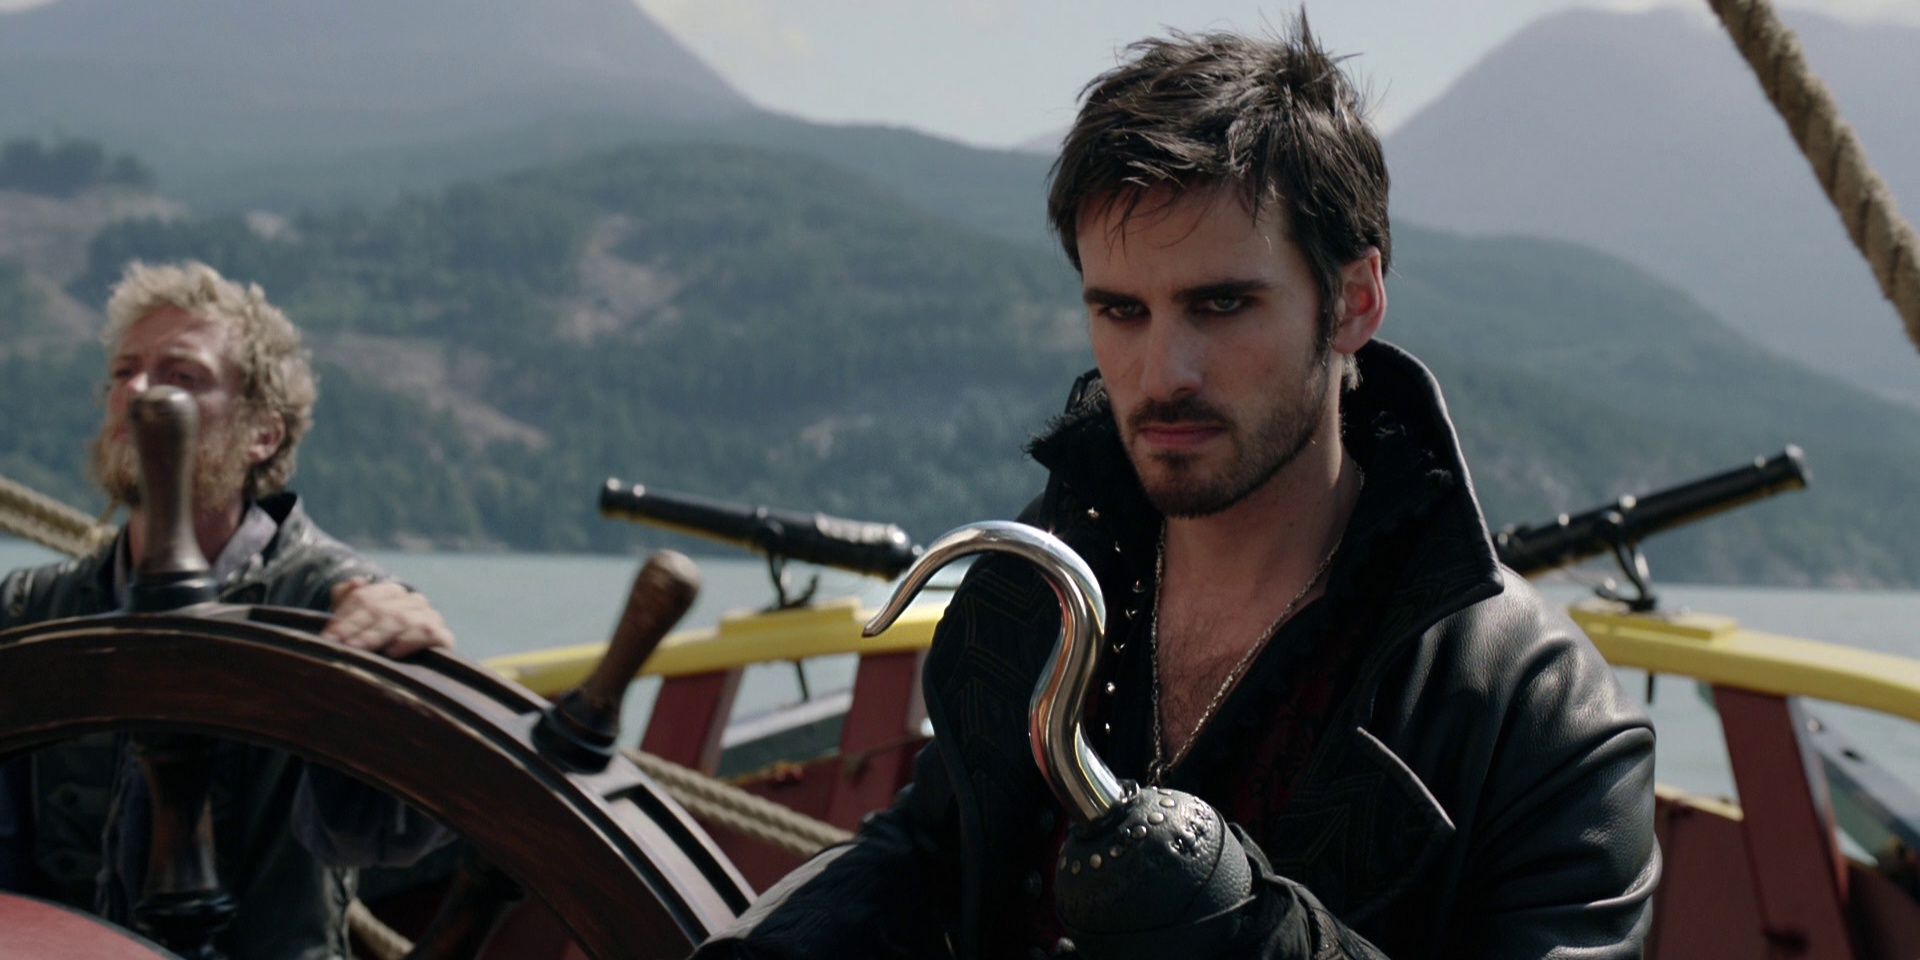 Once Upon A Time 10 Hidden Details About Captain Hook’s Costume You Didn’t Notice